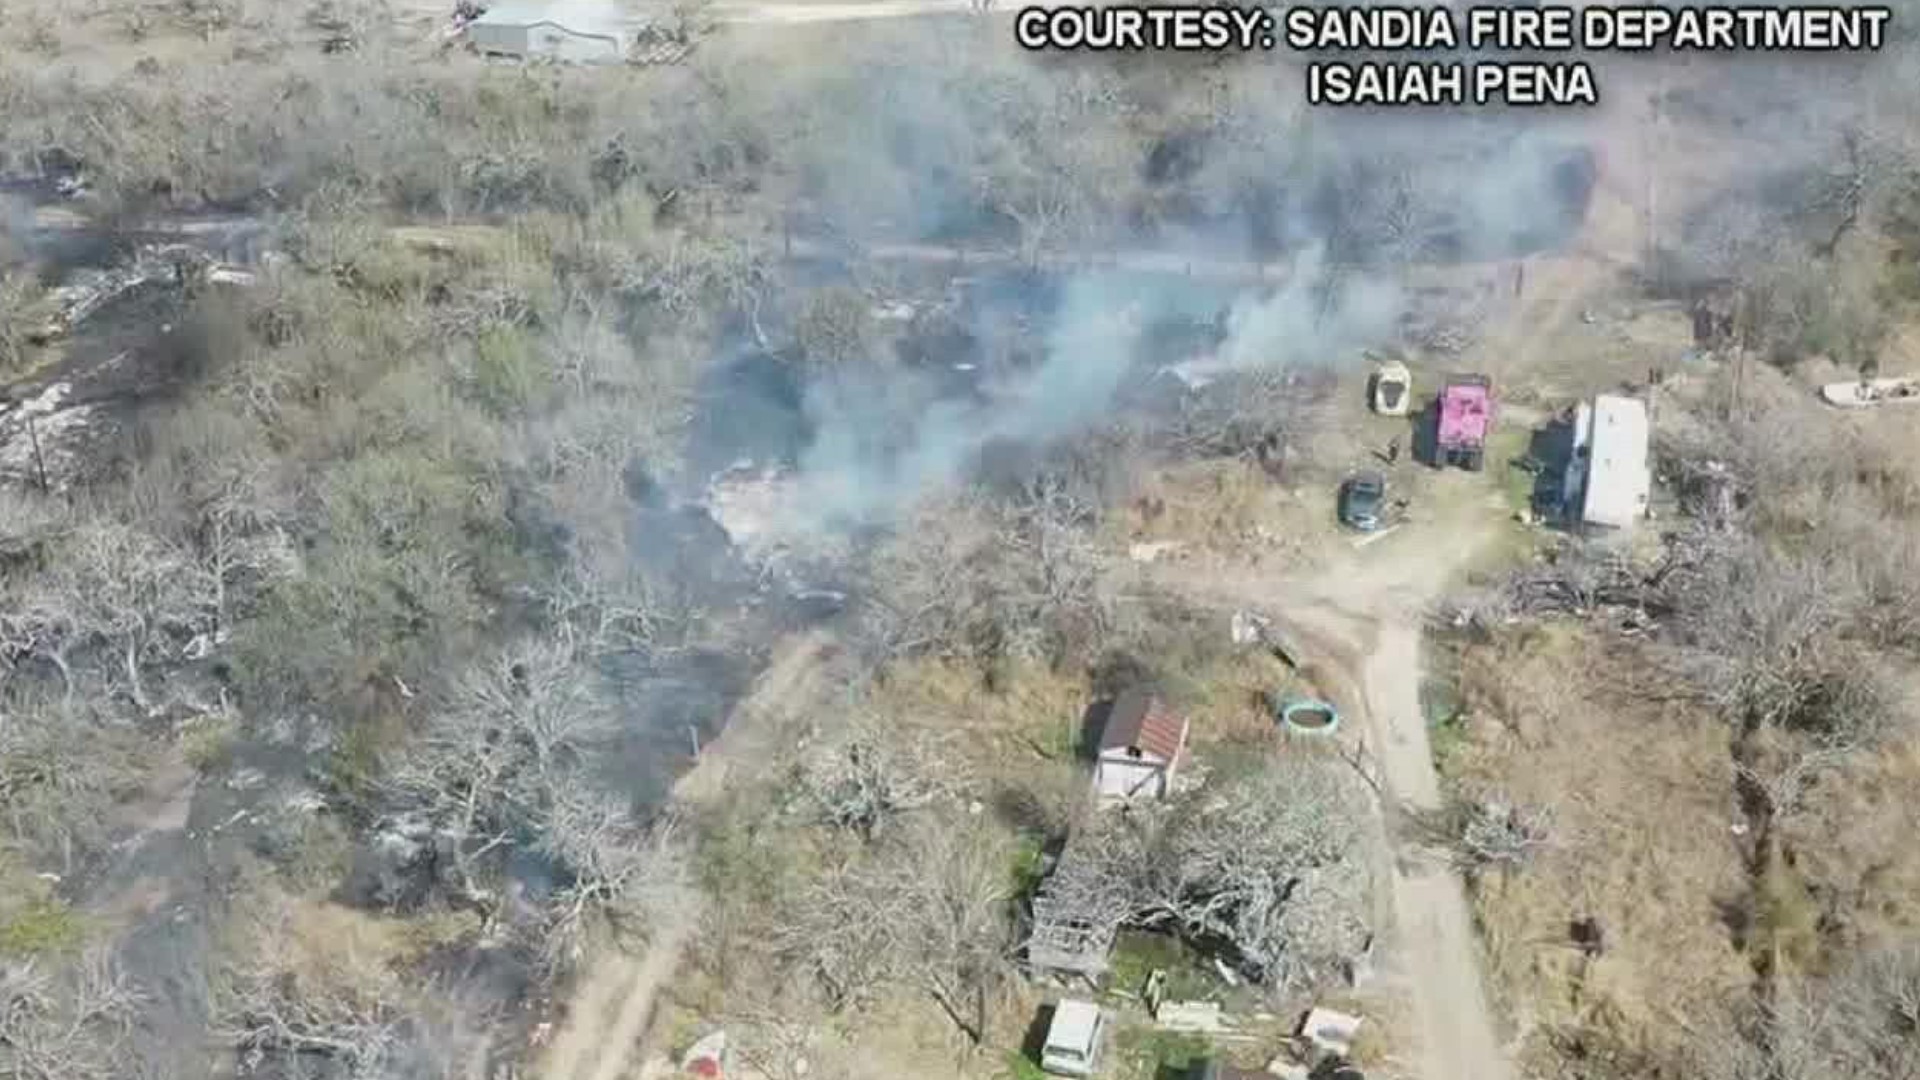 Several volunteer are fire departments including the Texas A&M Forest Service were on the scene with bulldozers.